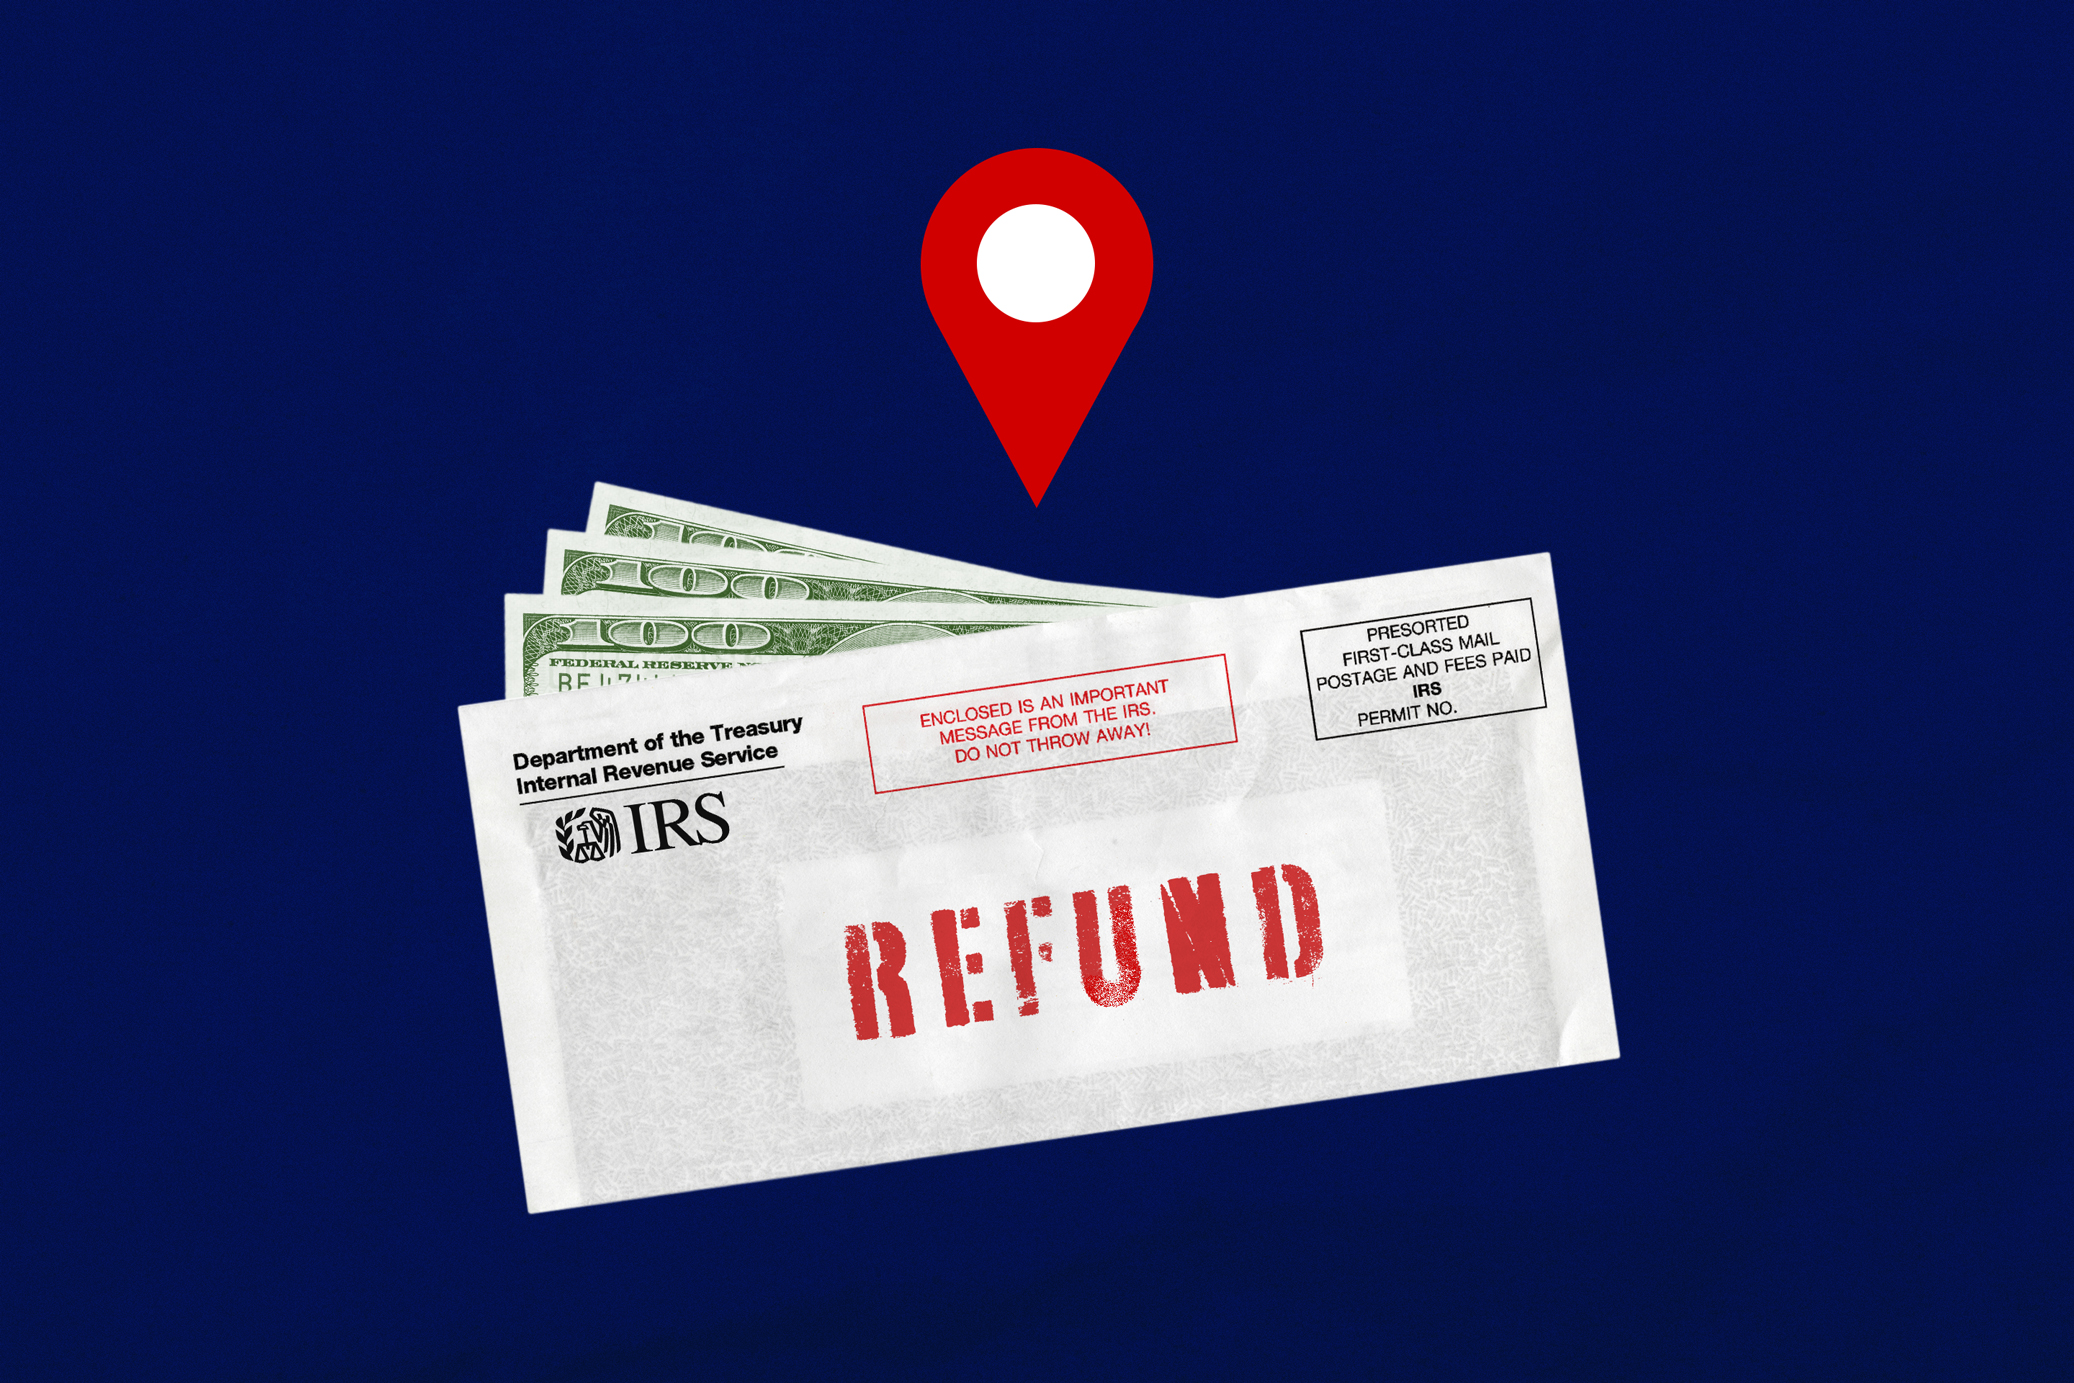 Where's My Refund? How to Track Your Tax Refund 2022 Money